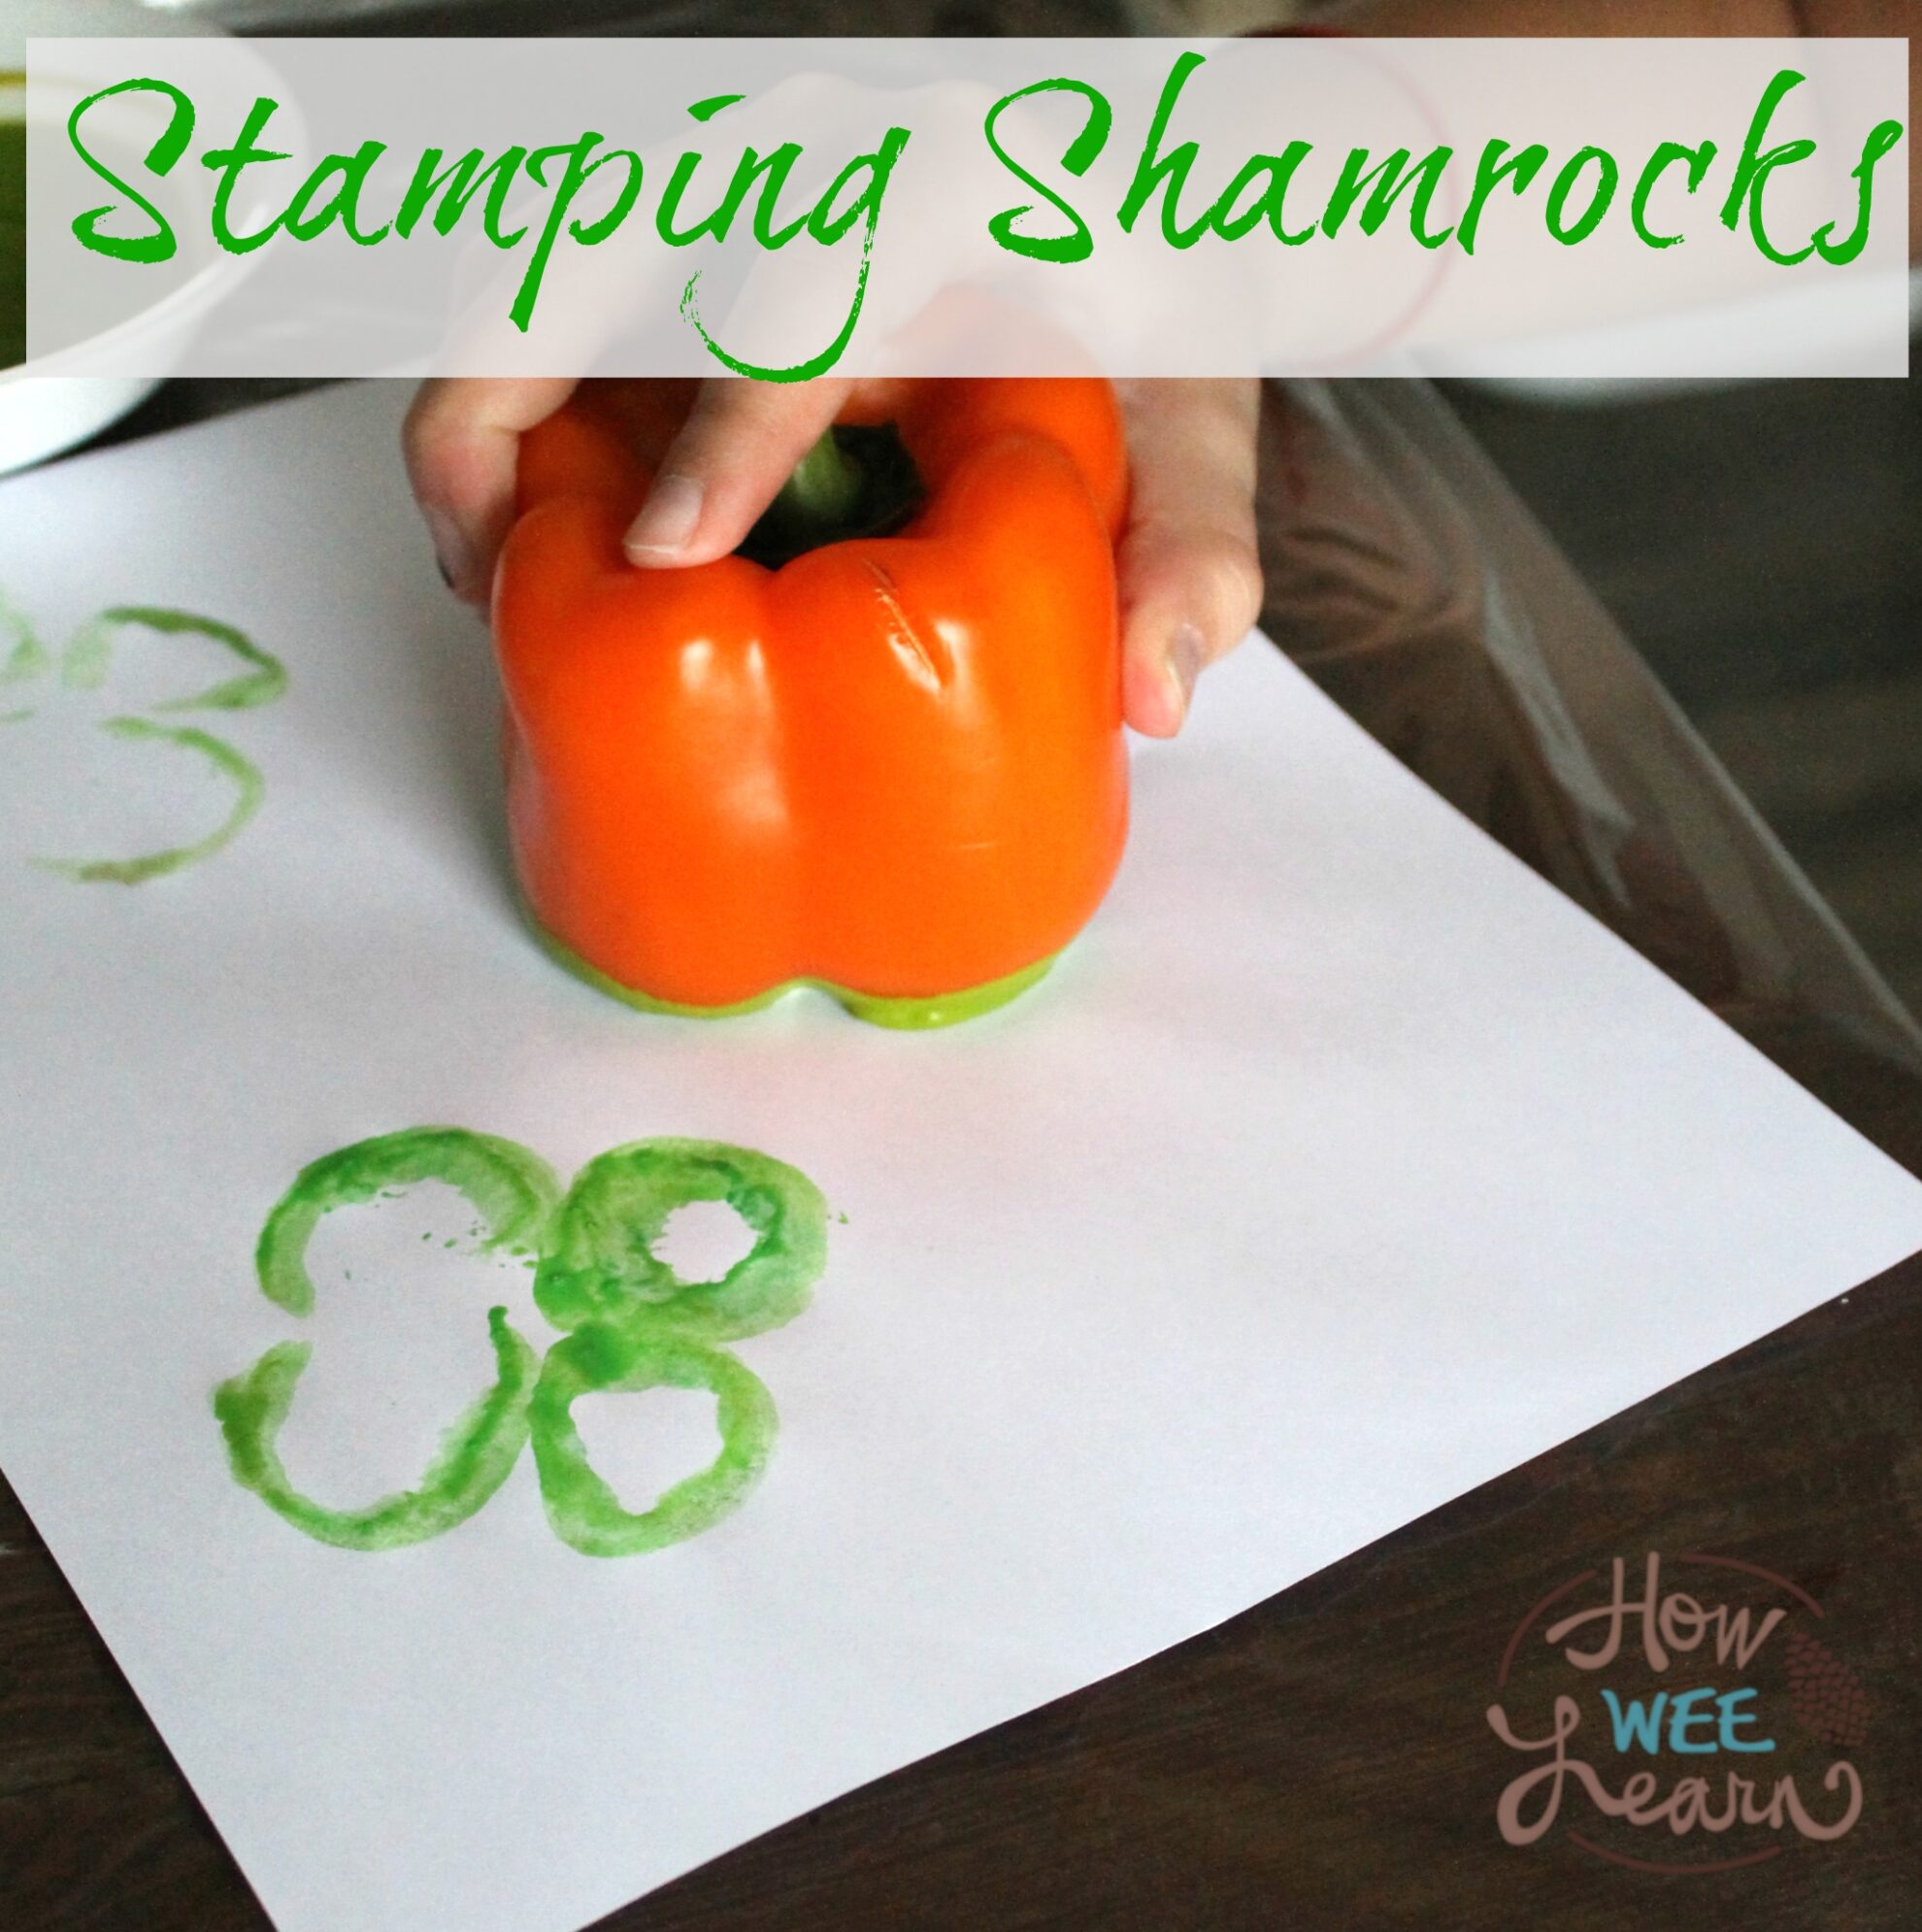 This is a great craft for St Patrick's Day! Making Shamrock stamps with preschoolers out of peppers